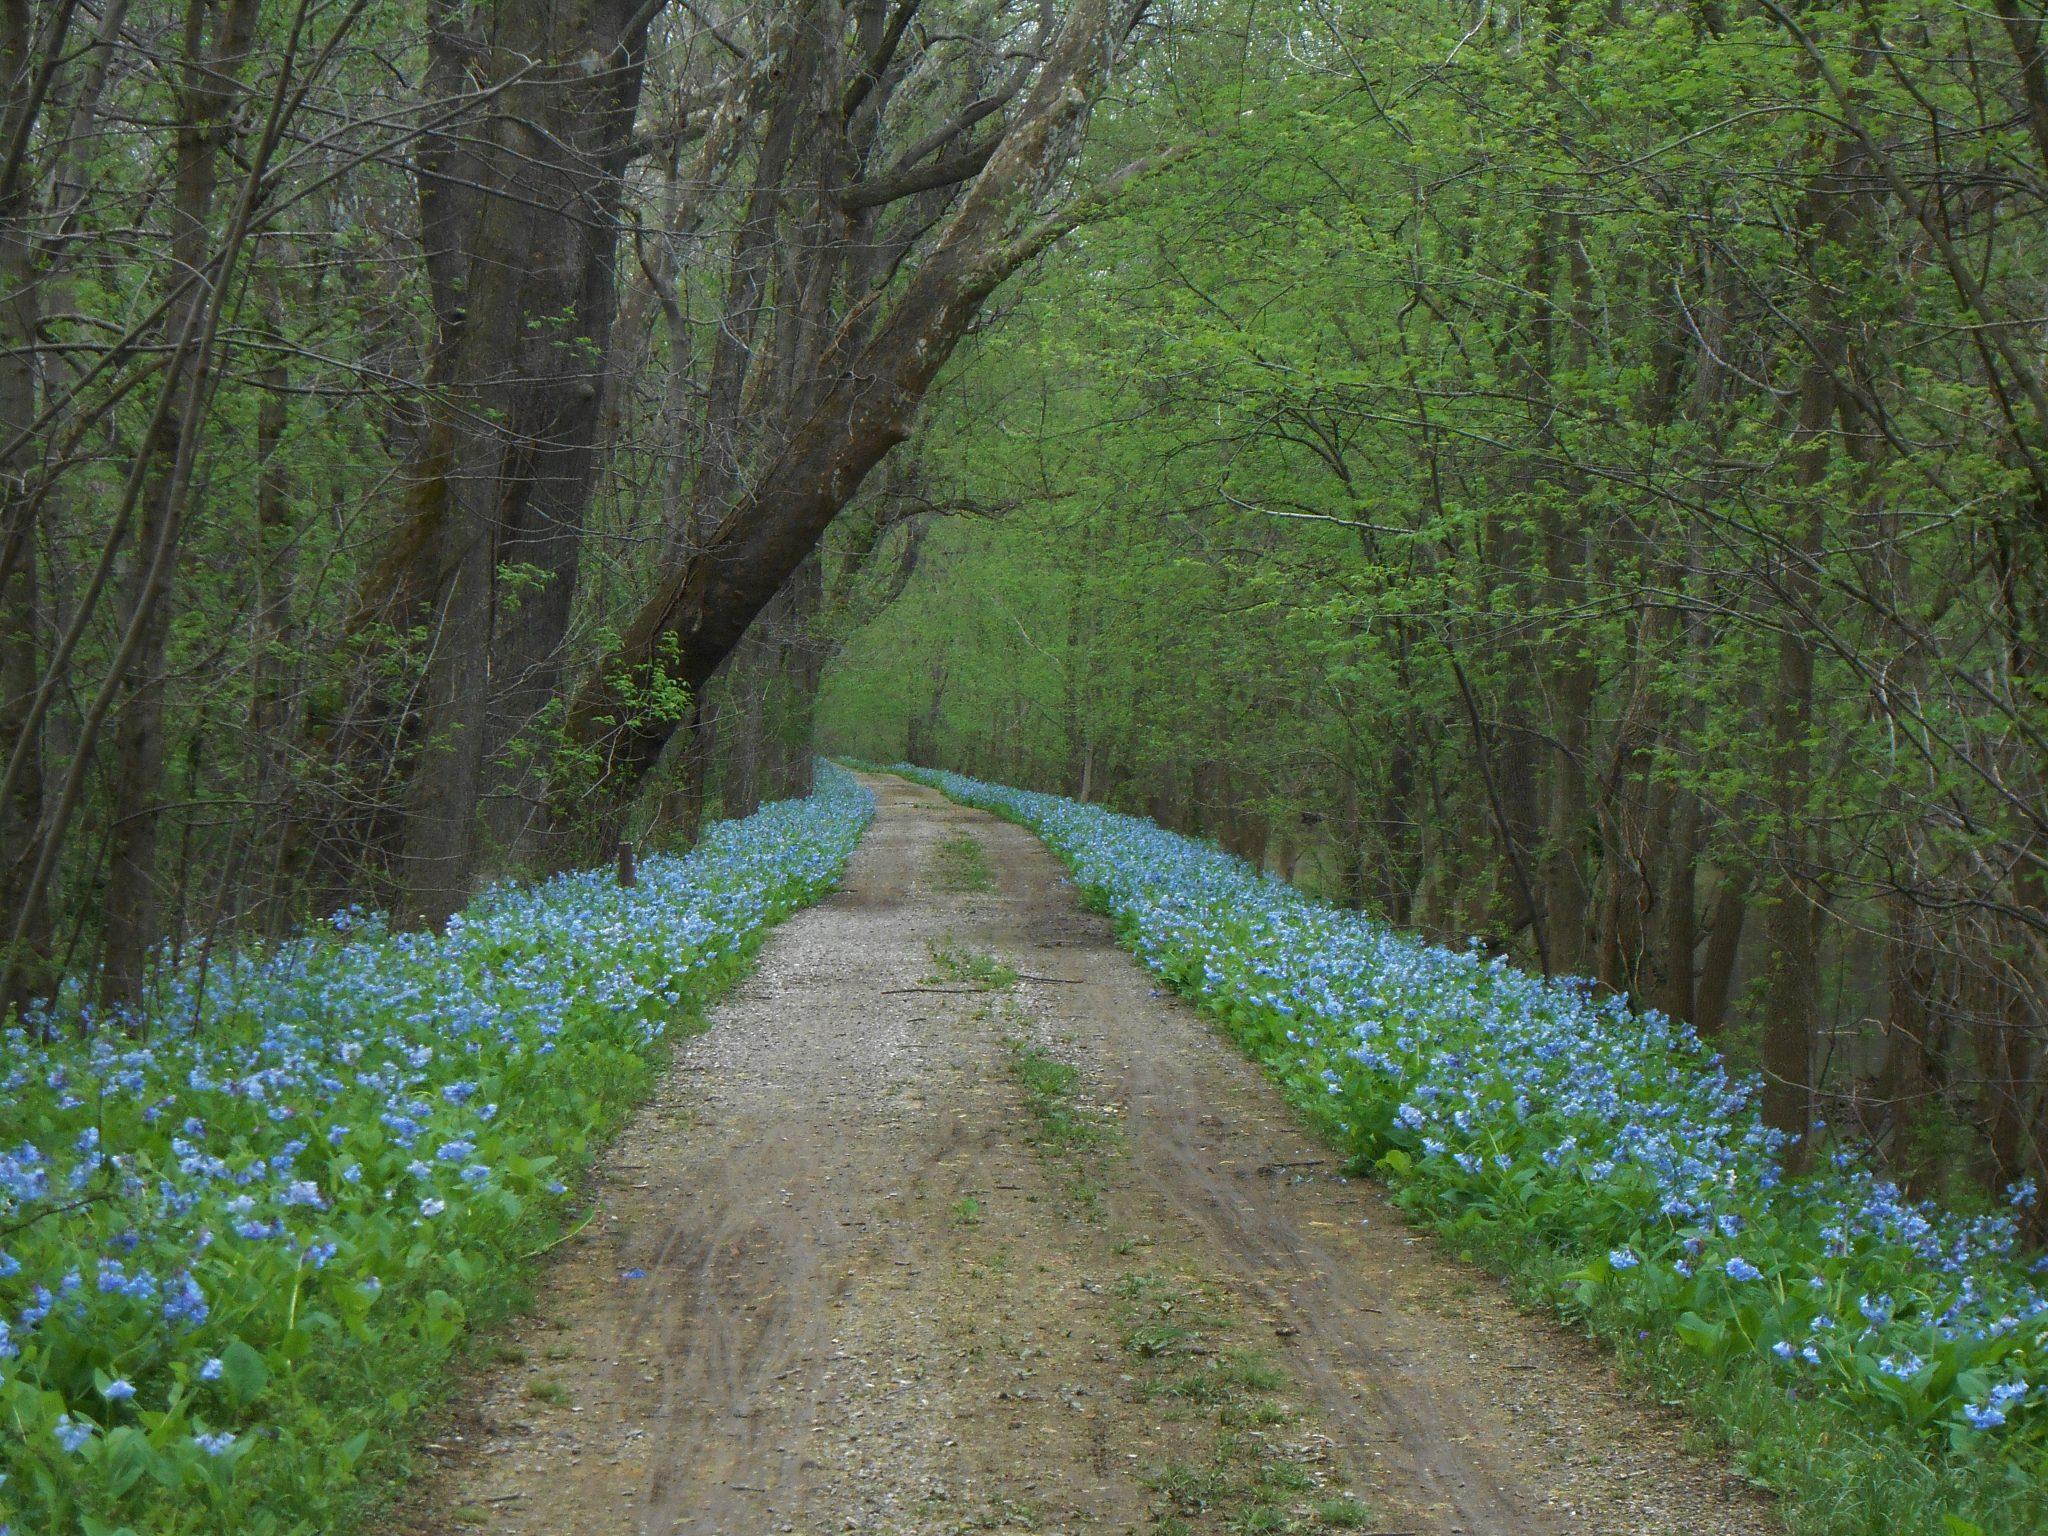 11Bluebells lining the C & O Canal towpath